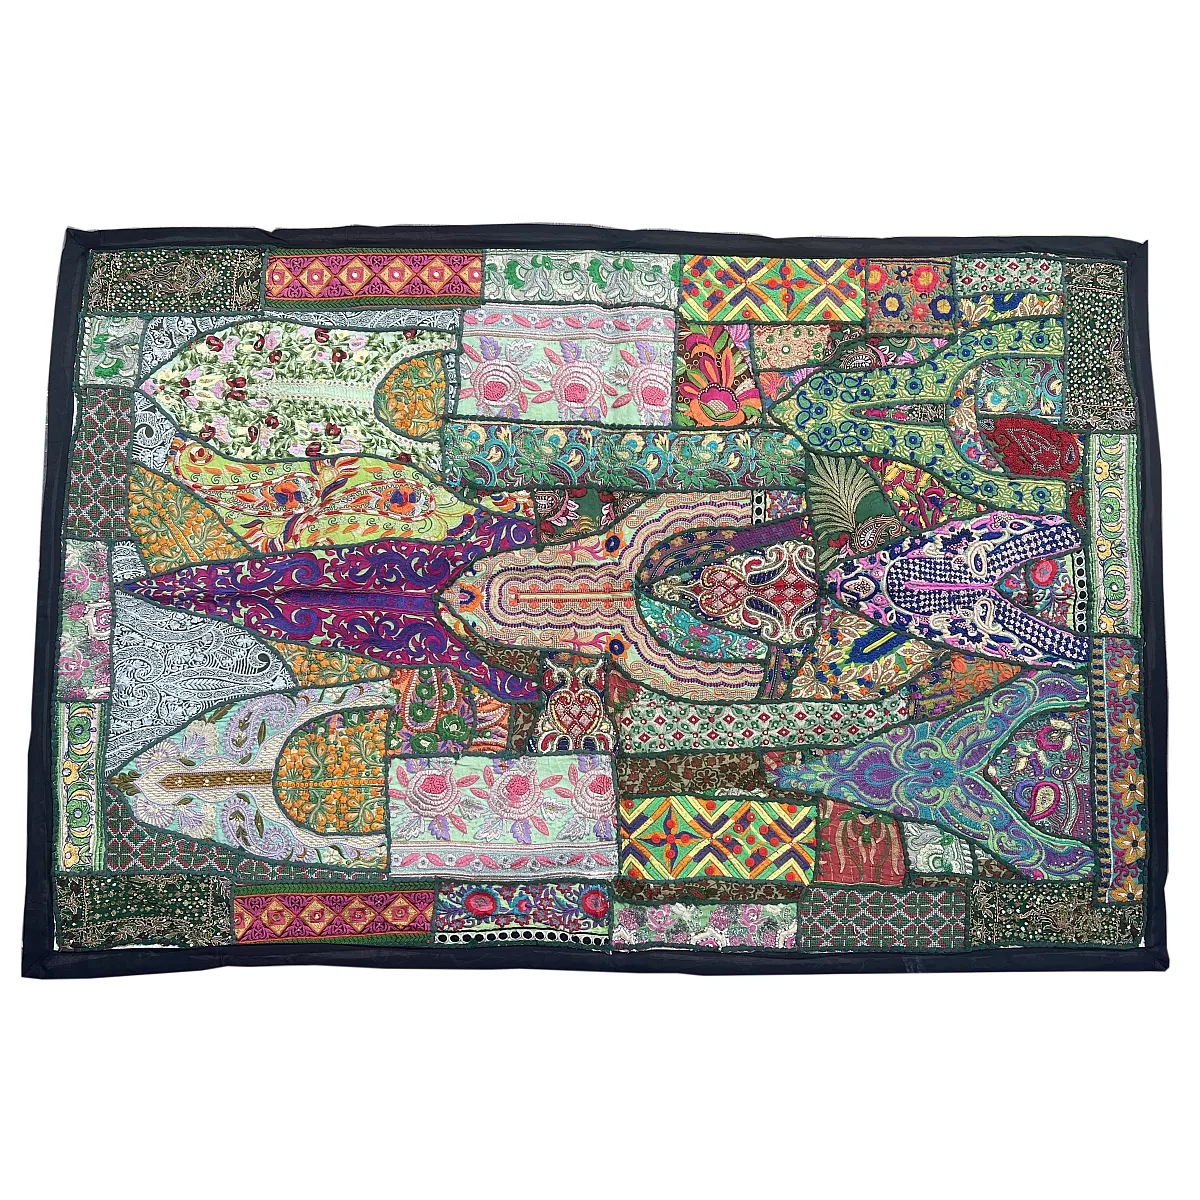 Bohemian Indian traditional hand stitched assorted color and design patchwork vintage wall decor tapestry art work piece